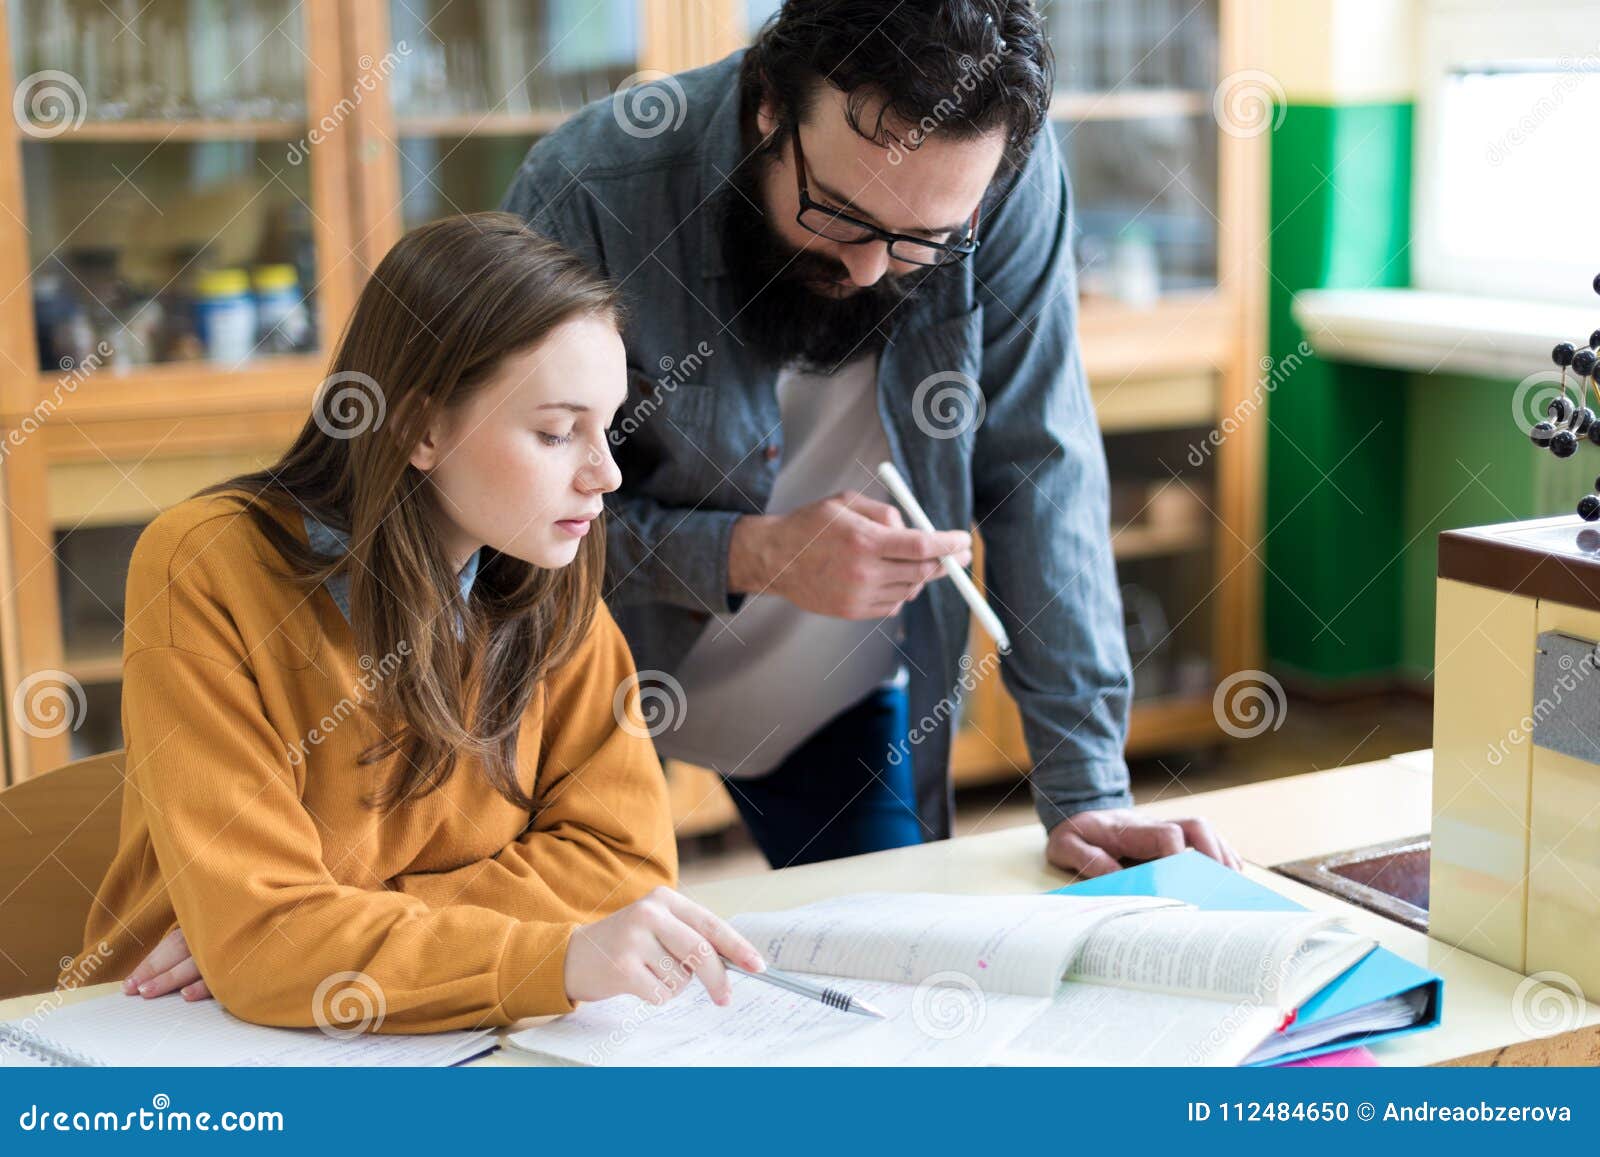 young teacher helping his student in chemistry class. education and tutoring concept.